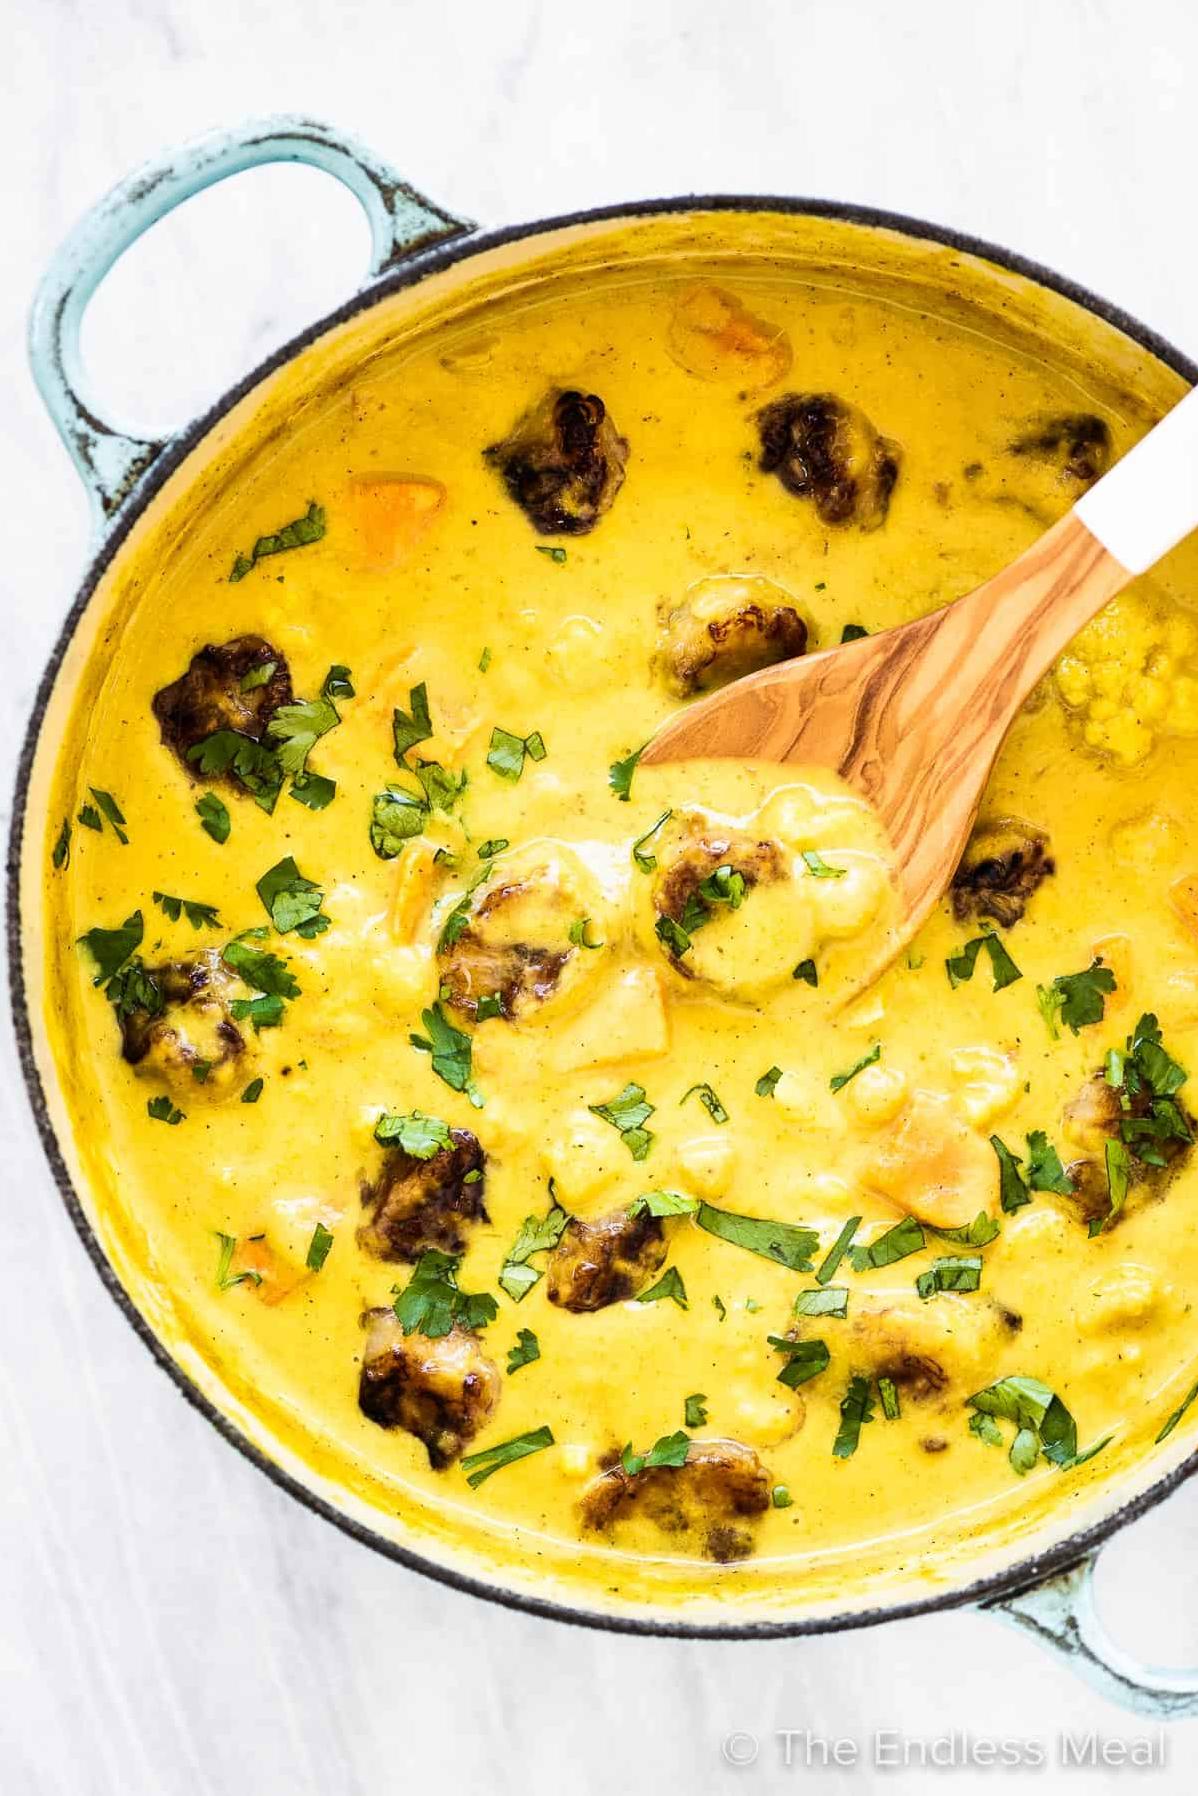  A warm and hearty bowl of banana curry to comfort your soul